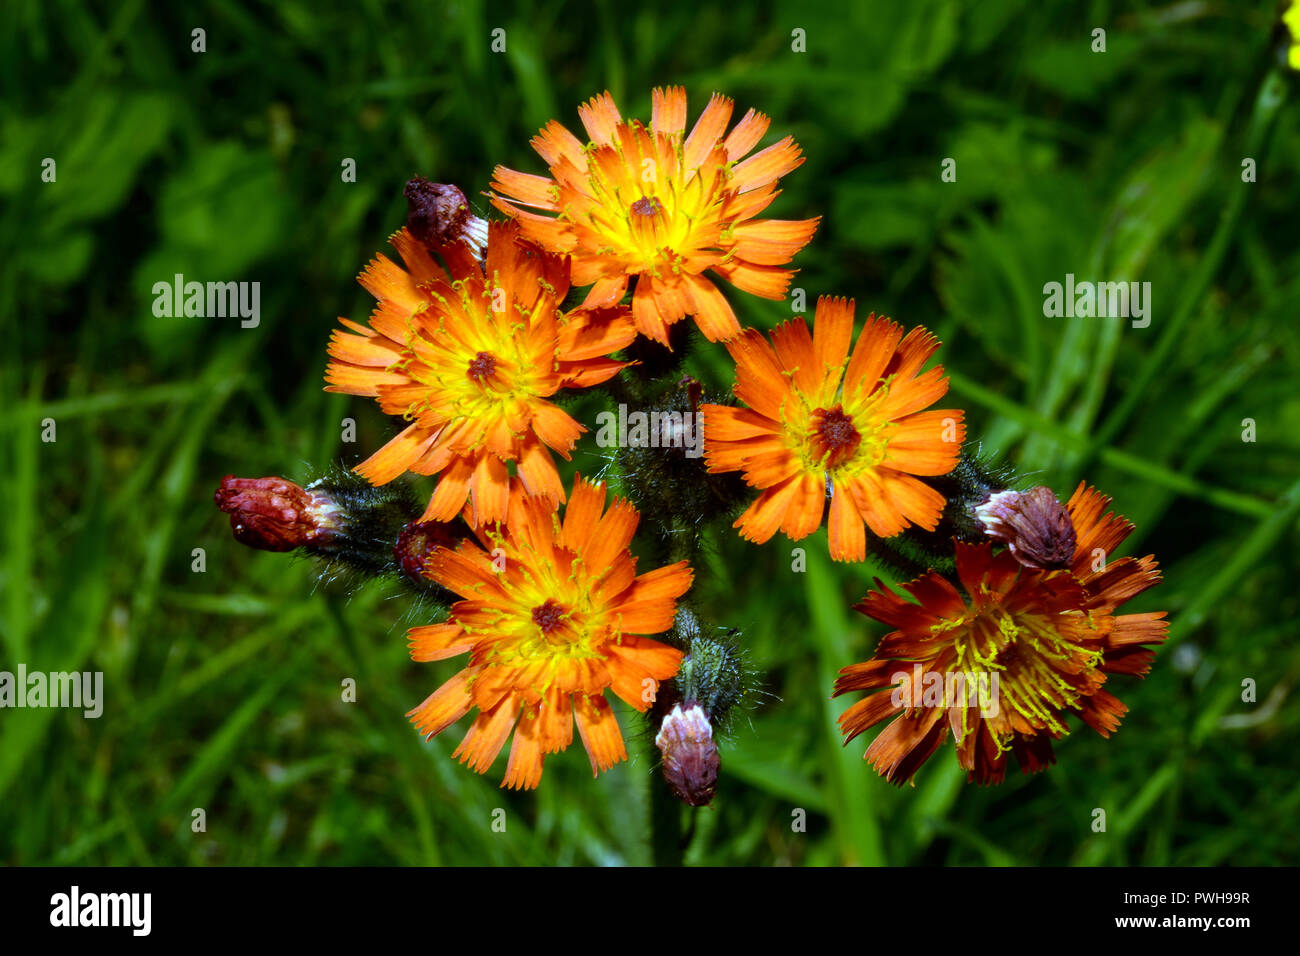 Hieracium aurantiacum (orange hawkweed) is found on roadsides and hedgebanks. It is native to Europe but has become invasive in other areas. Stock Photo